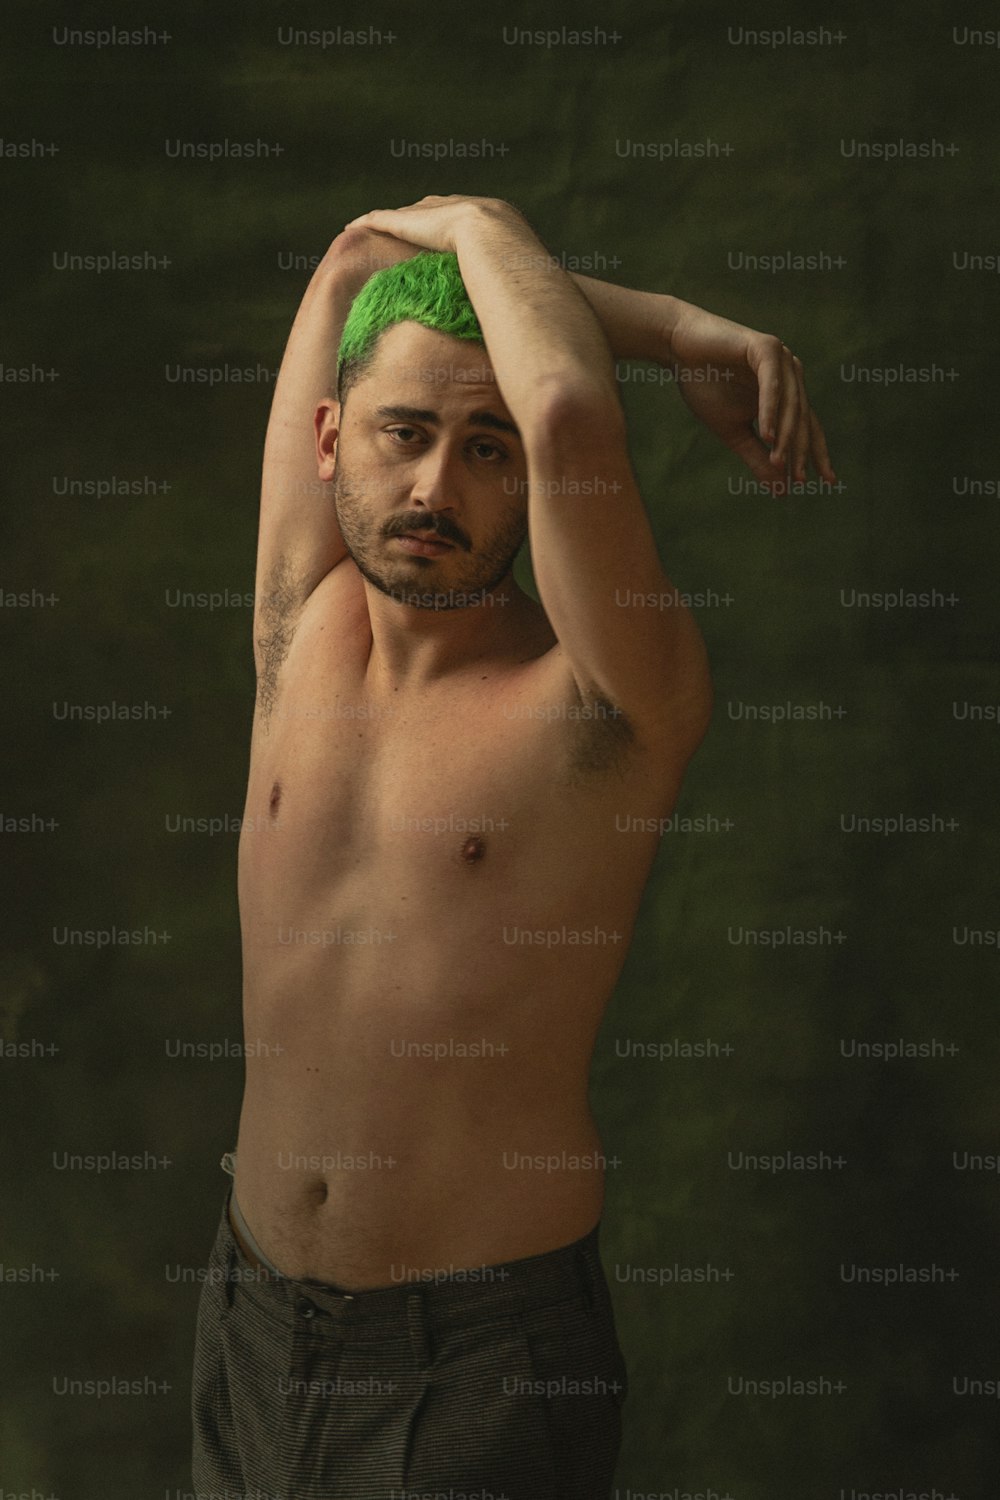 a shirtless man with a green mohawk